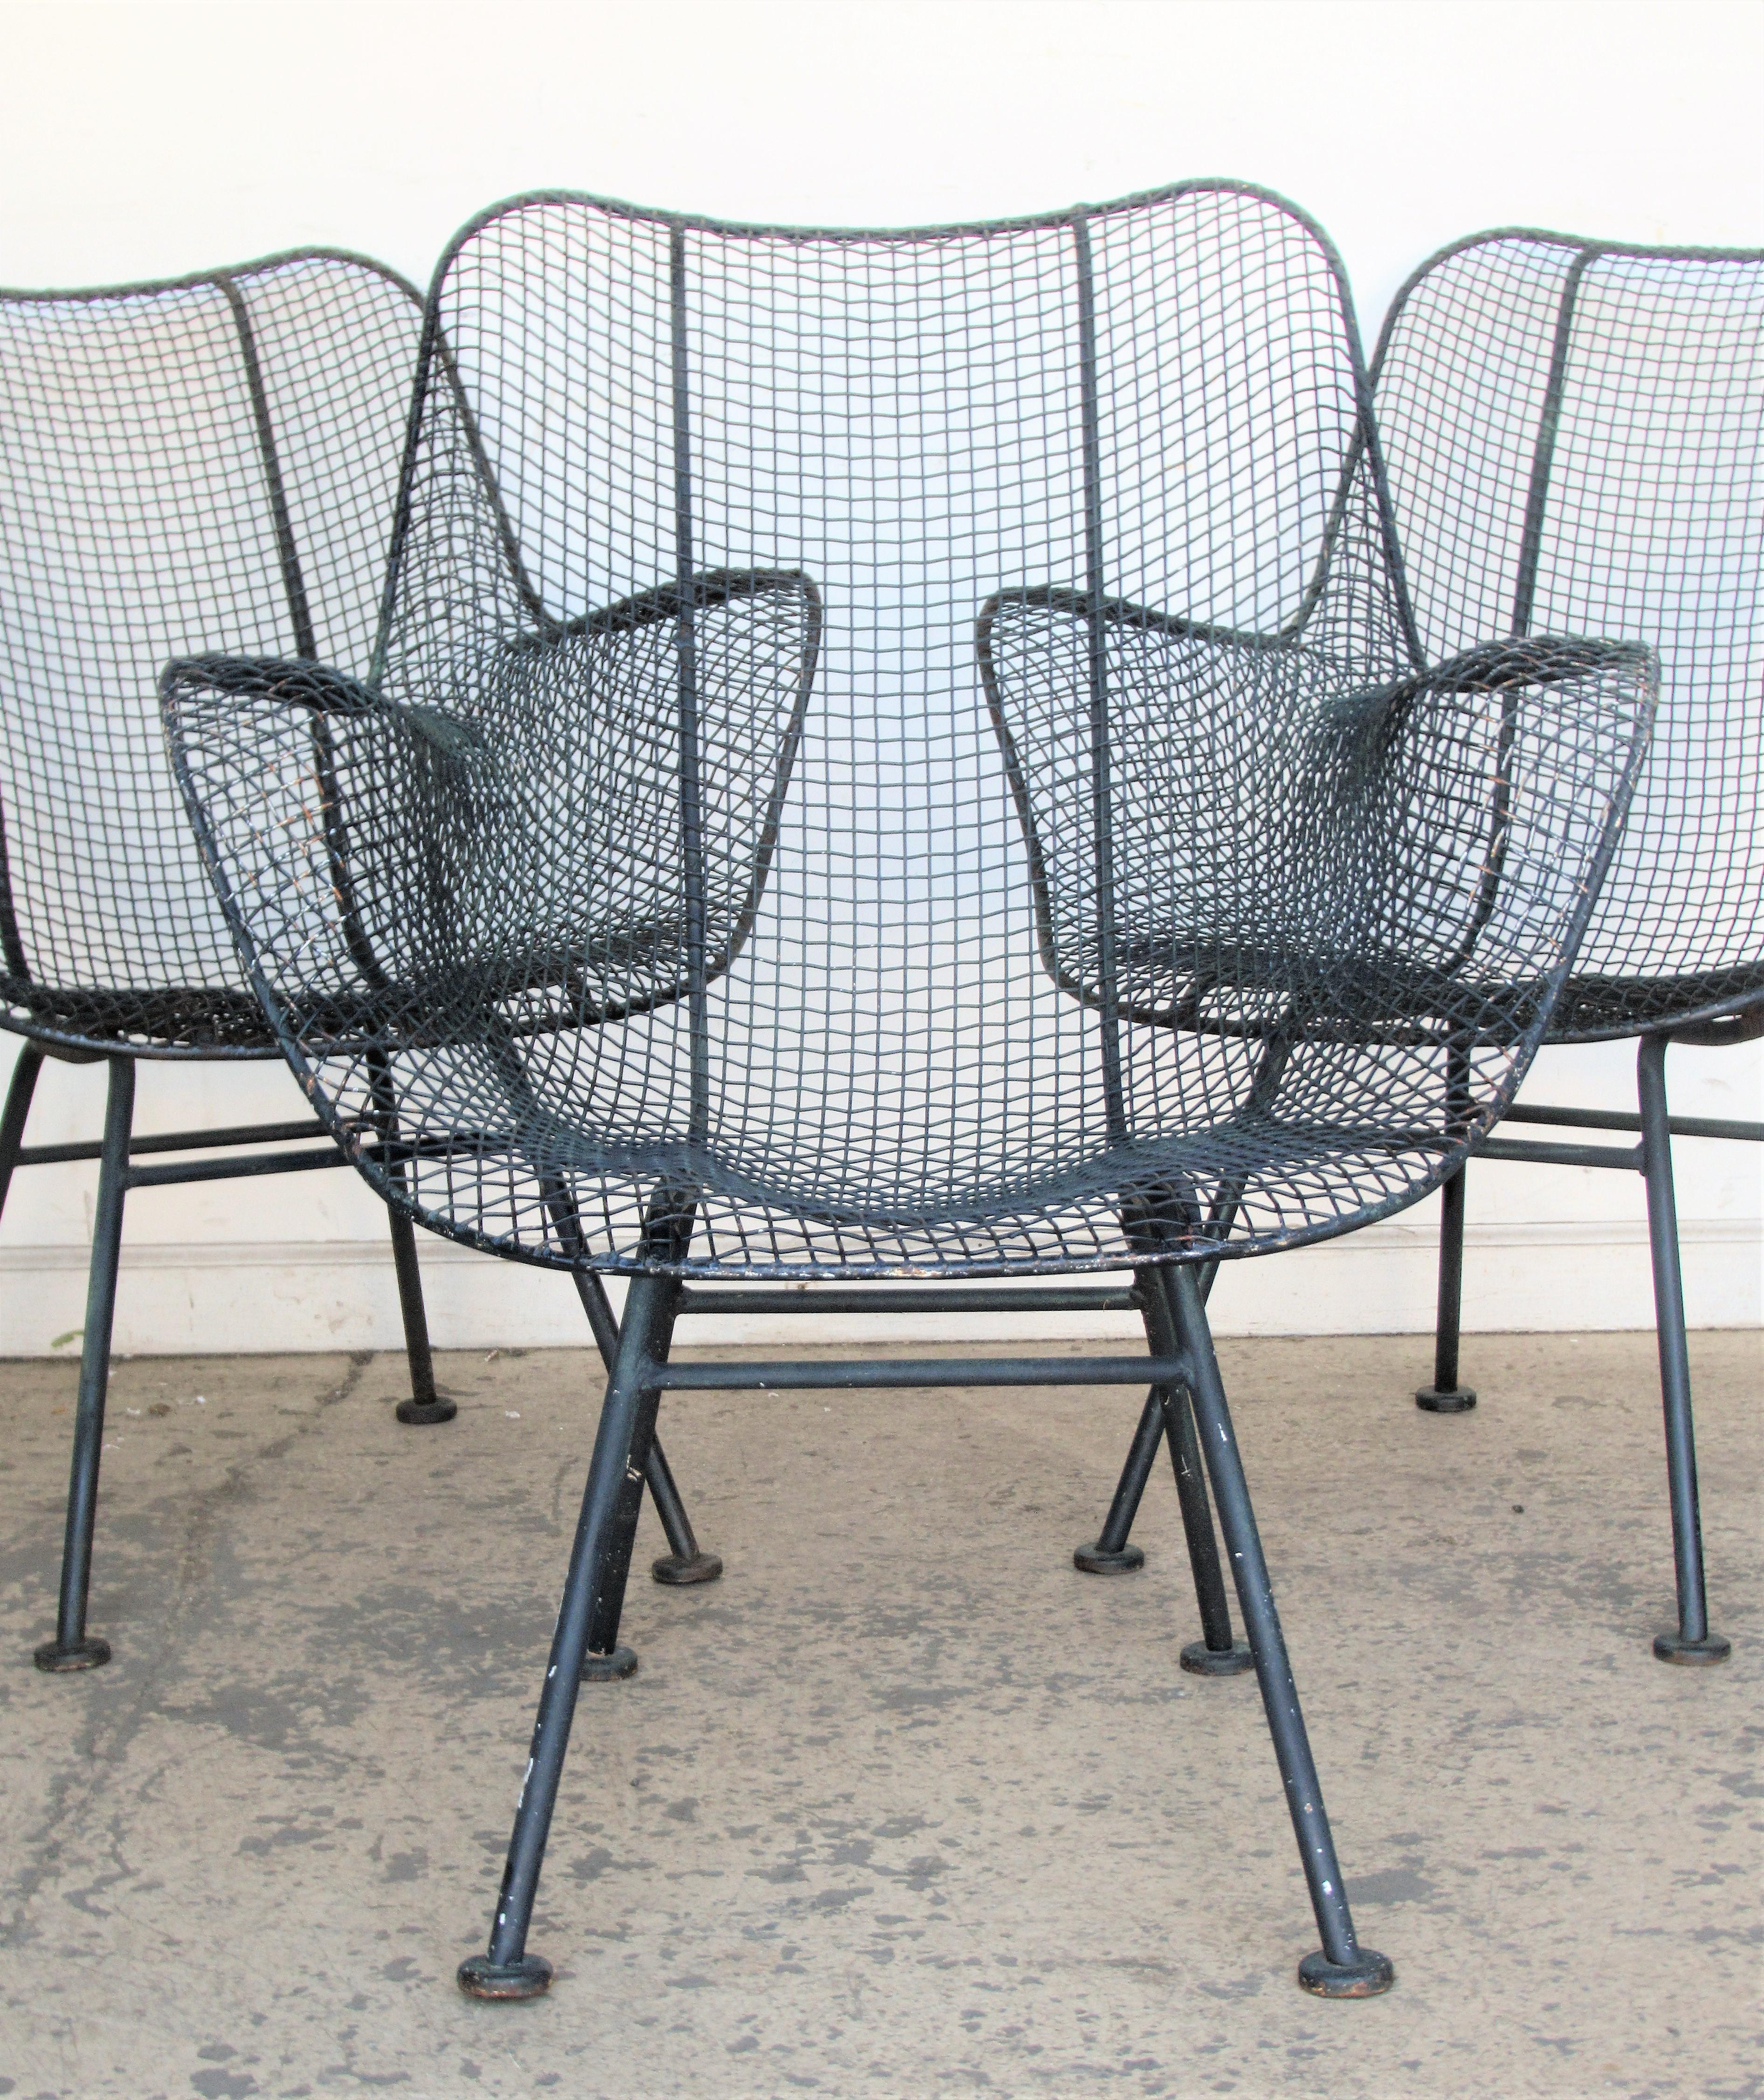 Set of six sculptura iron mesh patio garden lounge armchairs by Russell Woodard in beautifully aged old blackened surface, circa 1950. Great set. Look at all pictures and read condition report in comment section.